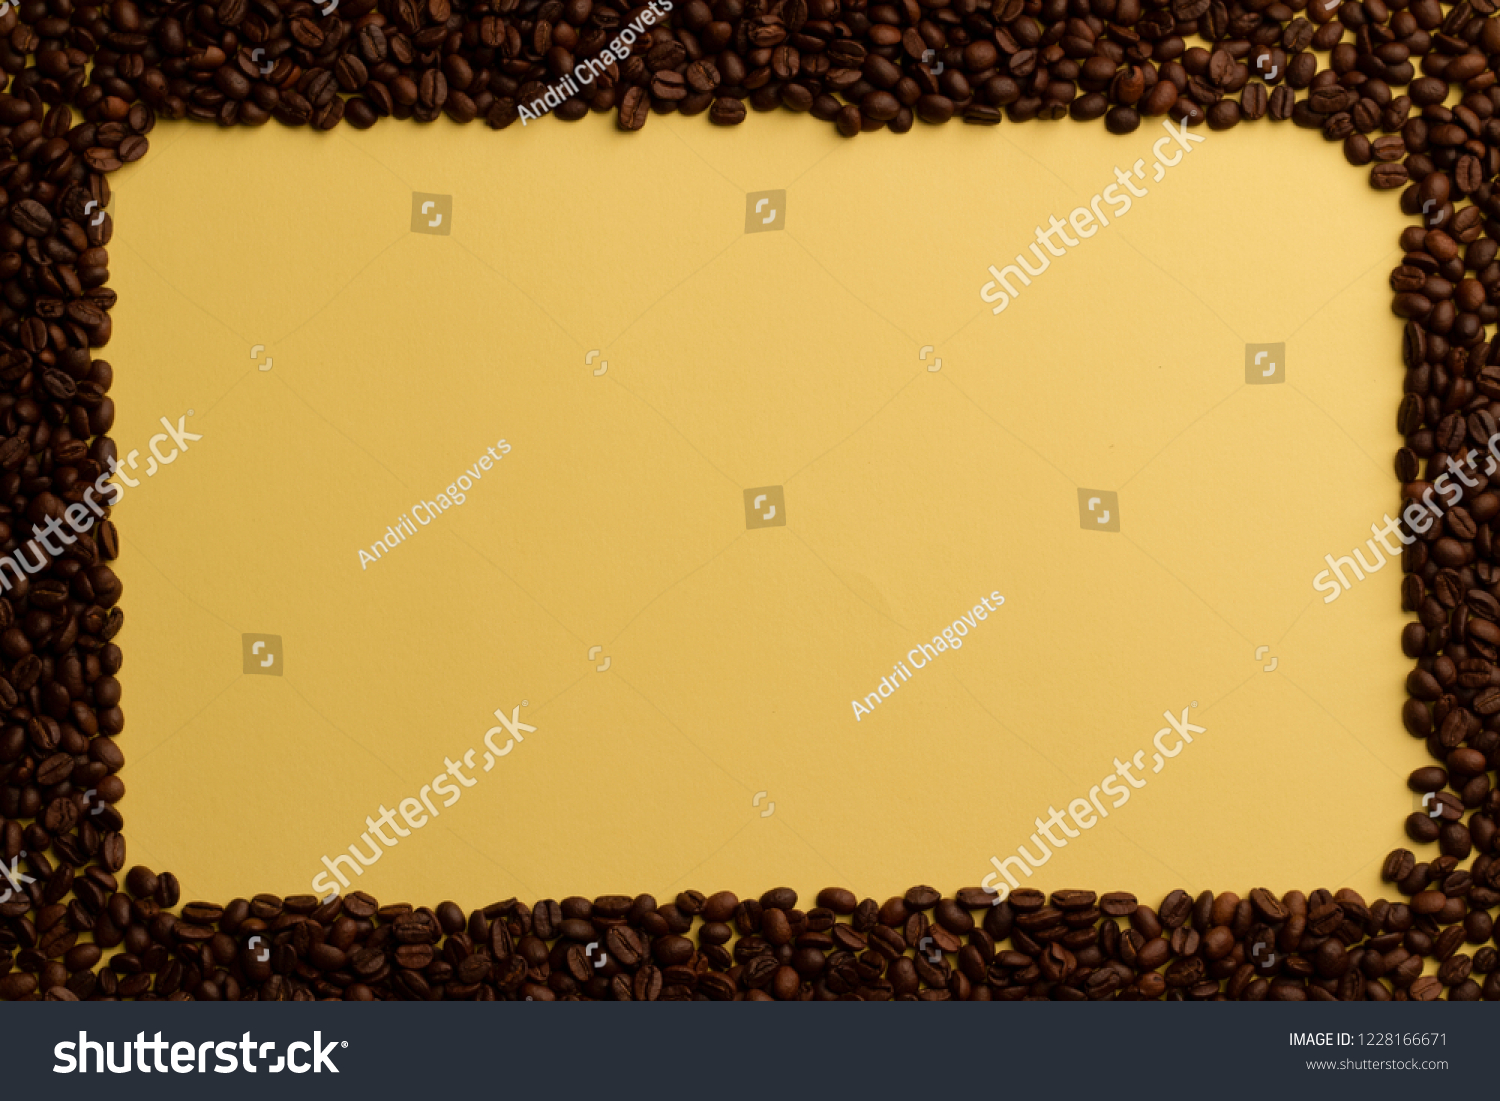 Rich yellow contrasting frame of coffee beans with a rounded upper right corner. Top view. Preparation for the inscriptions of the best selected coffee beans. Bright yellow background for ideas. #1228166671